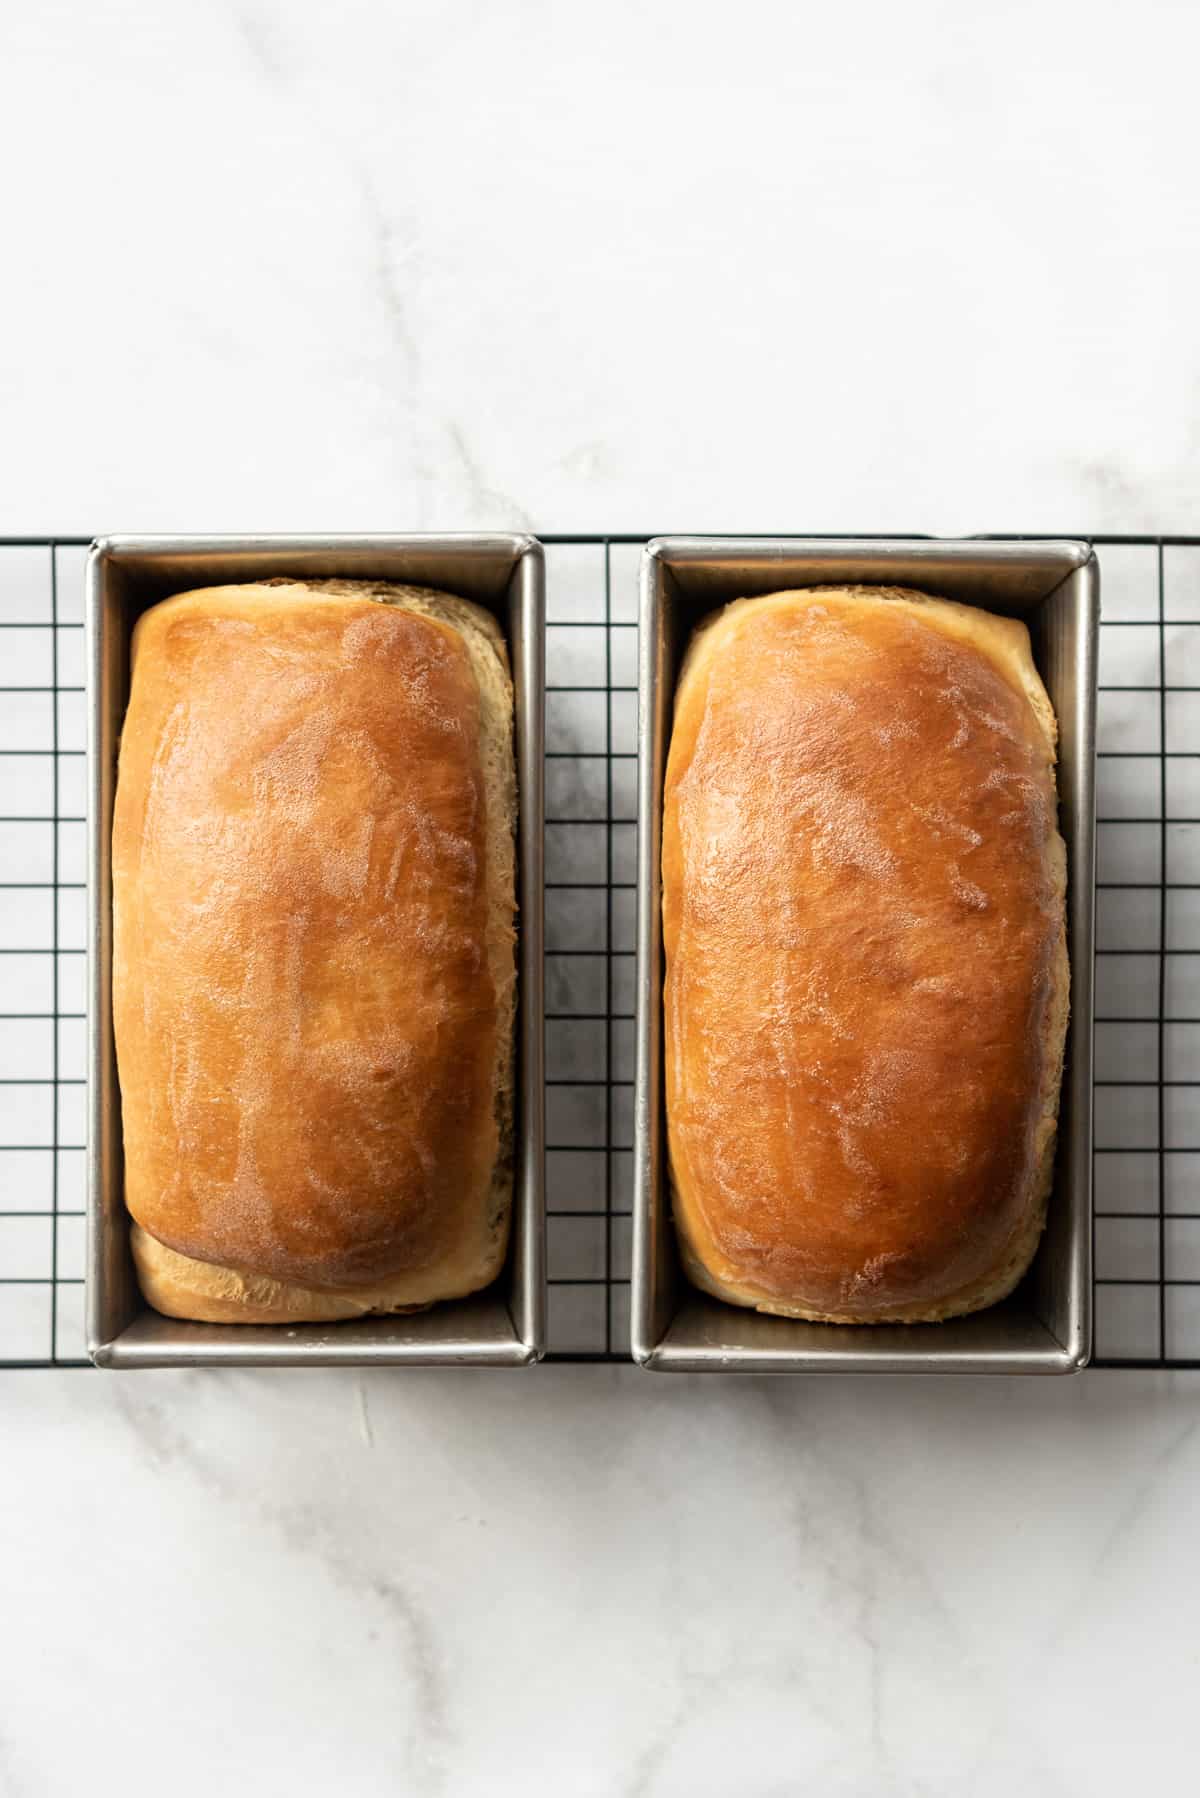 Two loaves of freshly baked homemade bread in loaf pans.